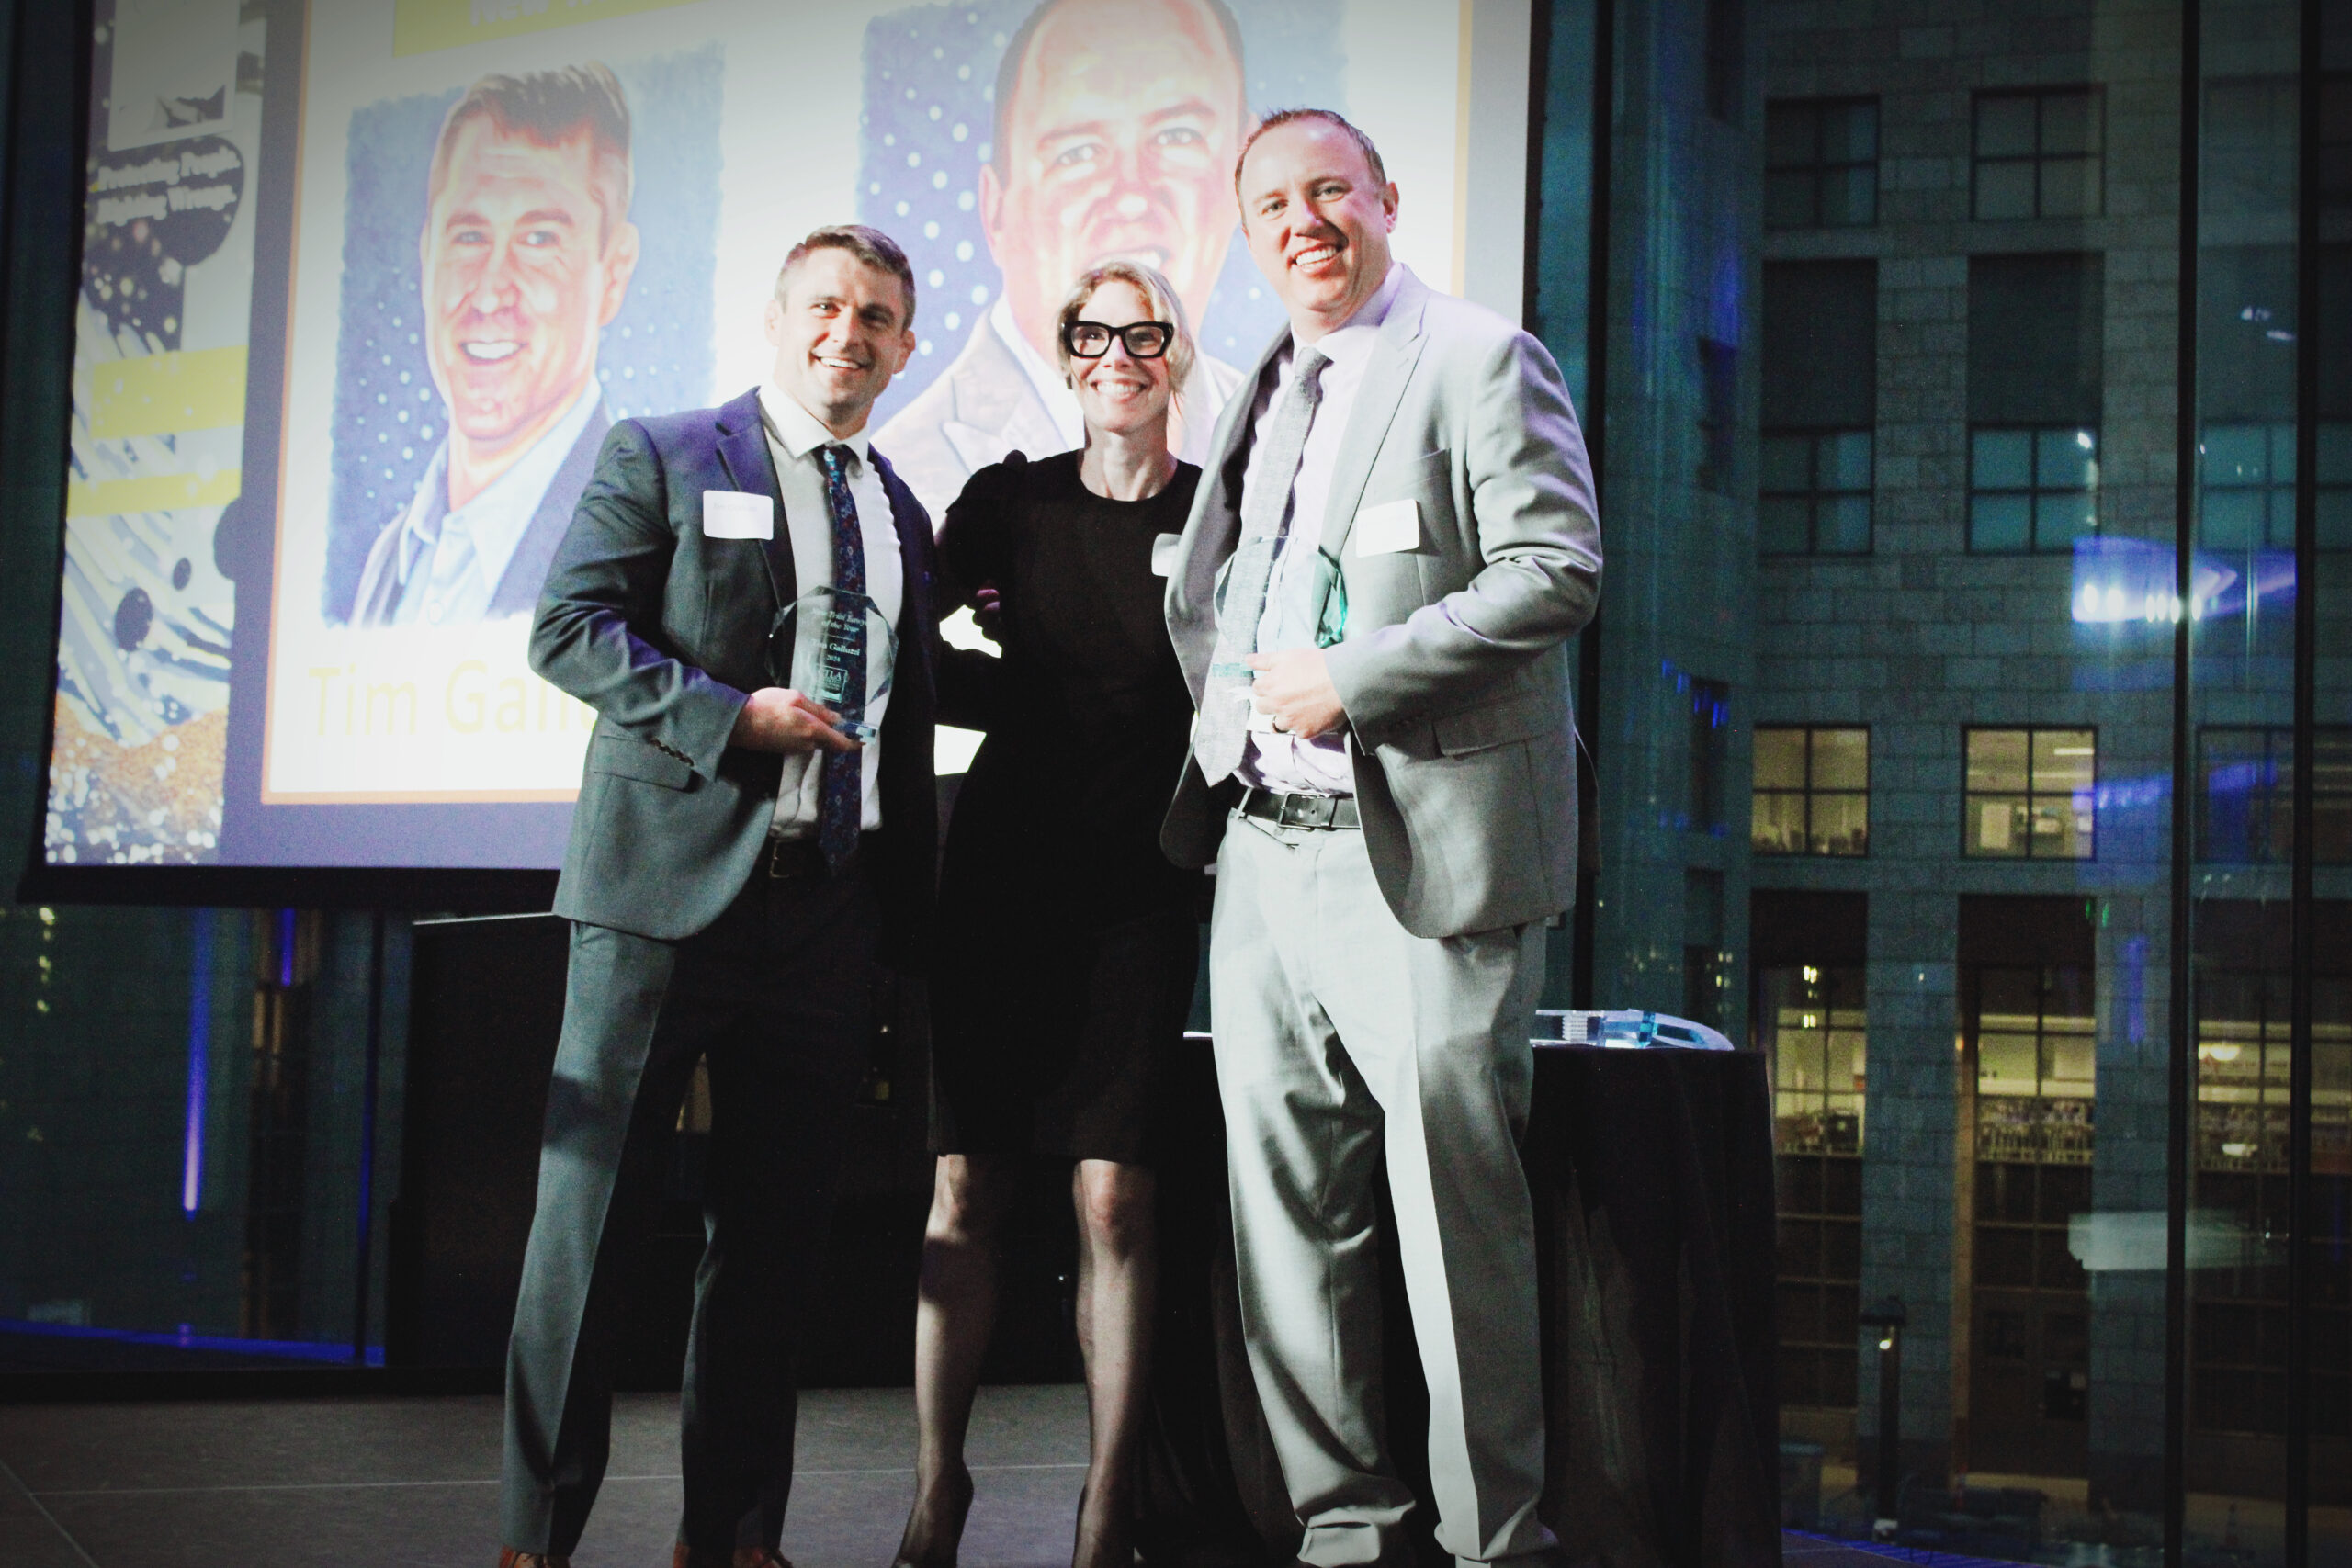 Kevin Cheney and Tim Galuzzi hold their New Trial Lawyer of the Year Awards with CTLA president Kari Jones Dulin